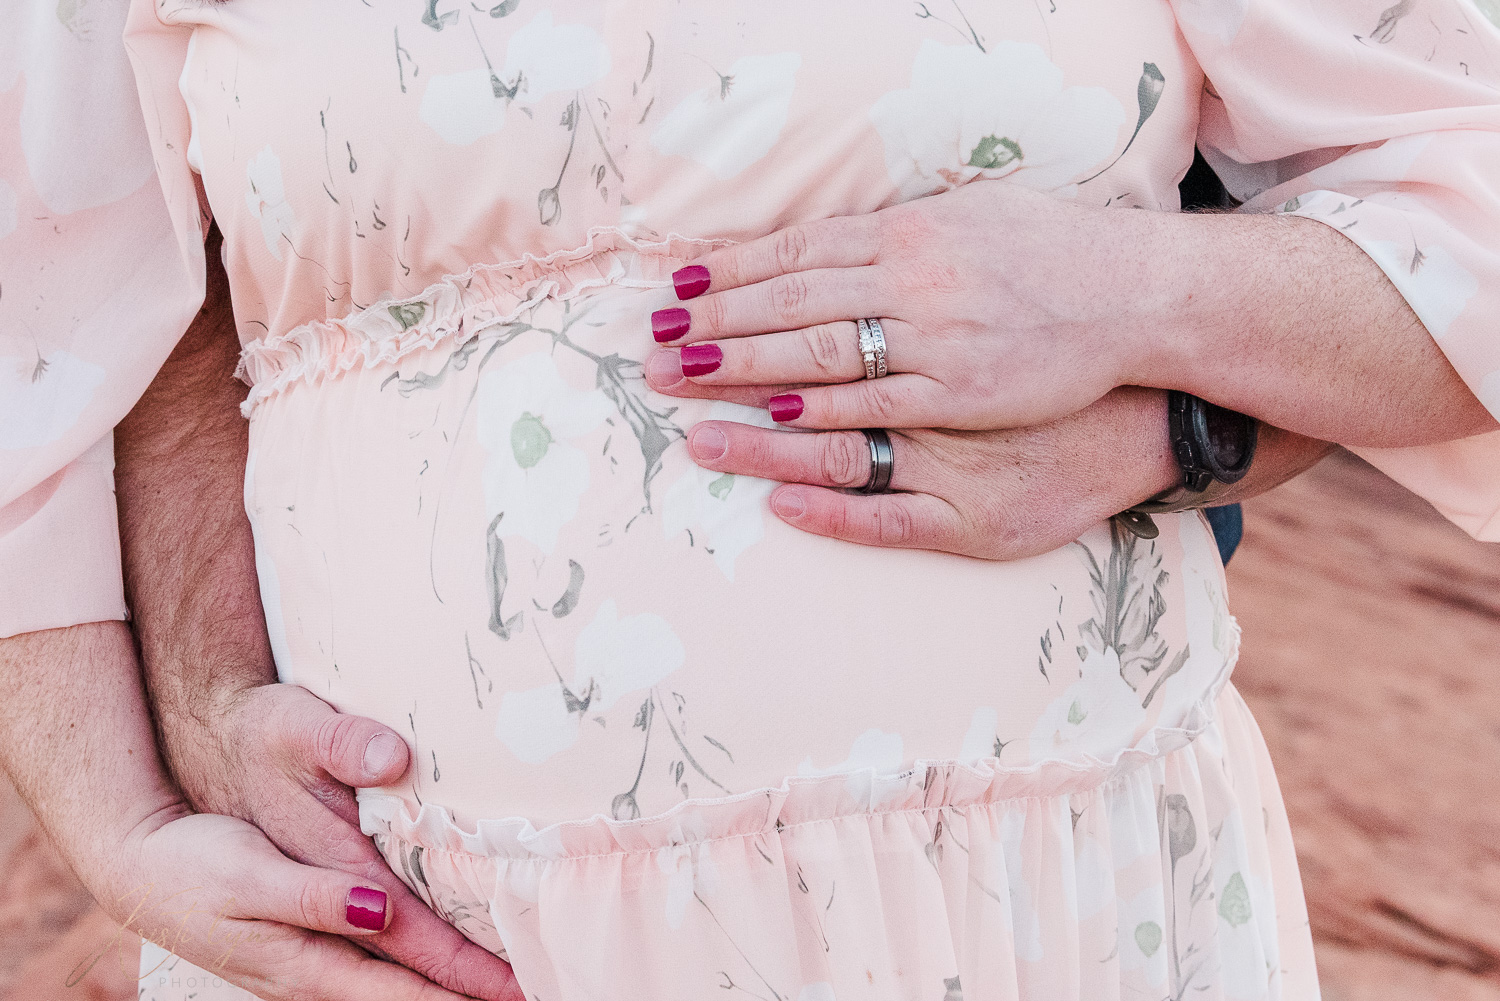 Parents place their hands during maternity session.